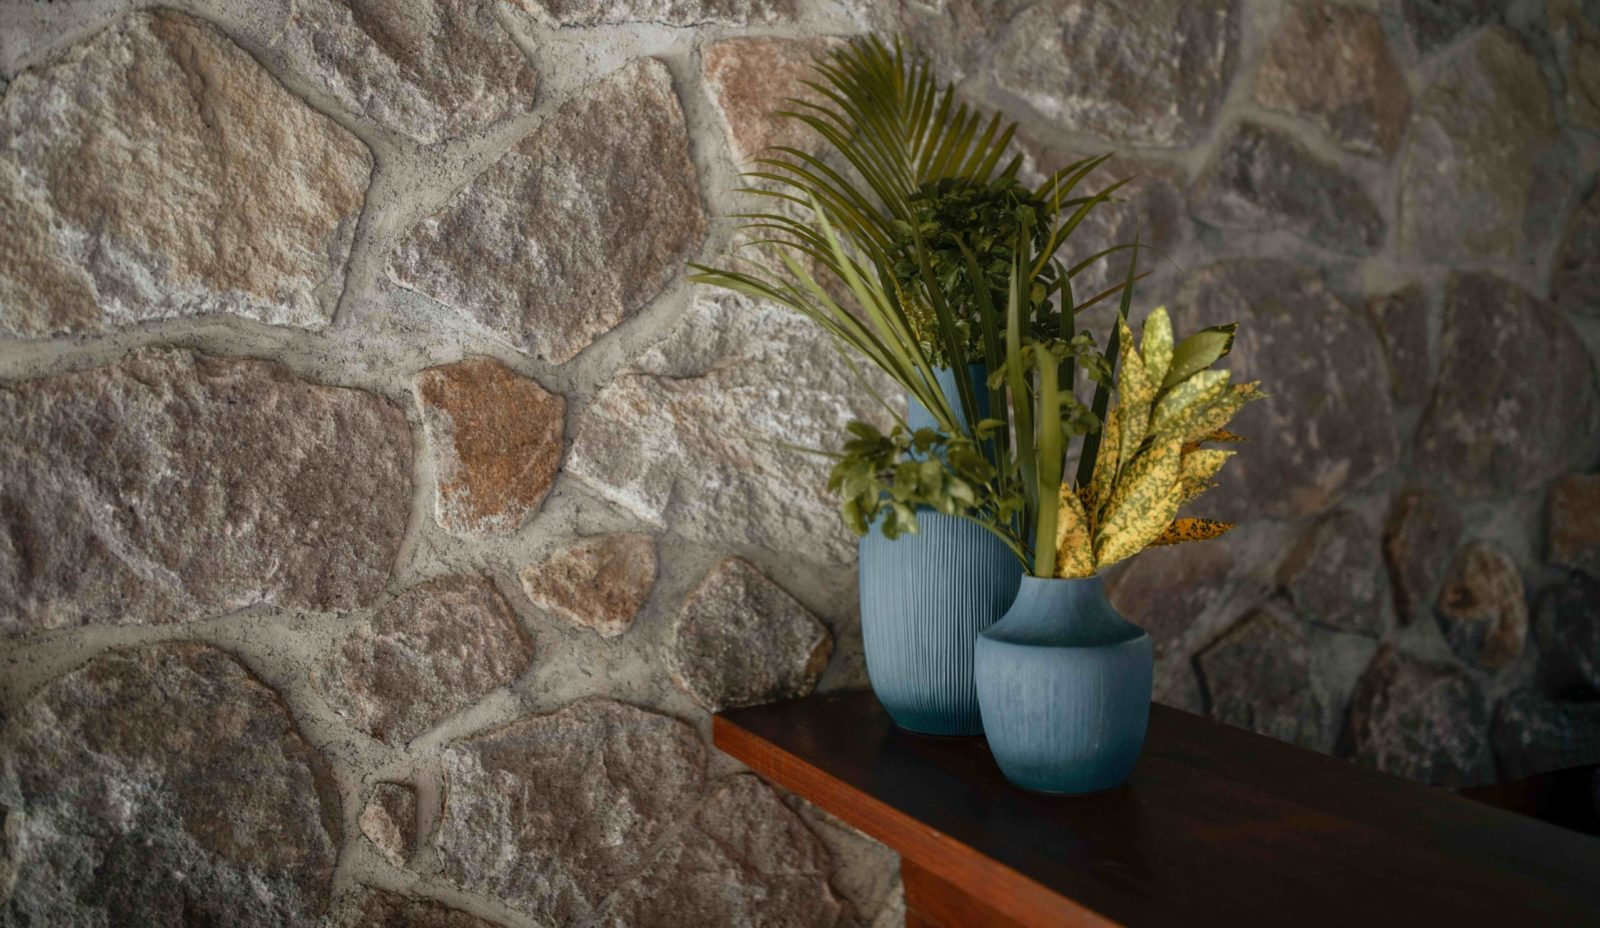 Two blue vases are filled with yellow and green foliage from the garden at Cosmos St Lucia, shown sitting on a wooden surface and against a stone wall